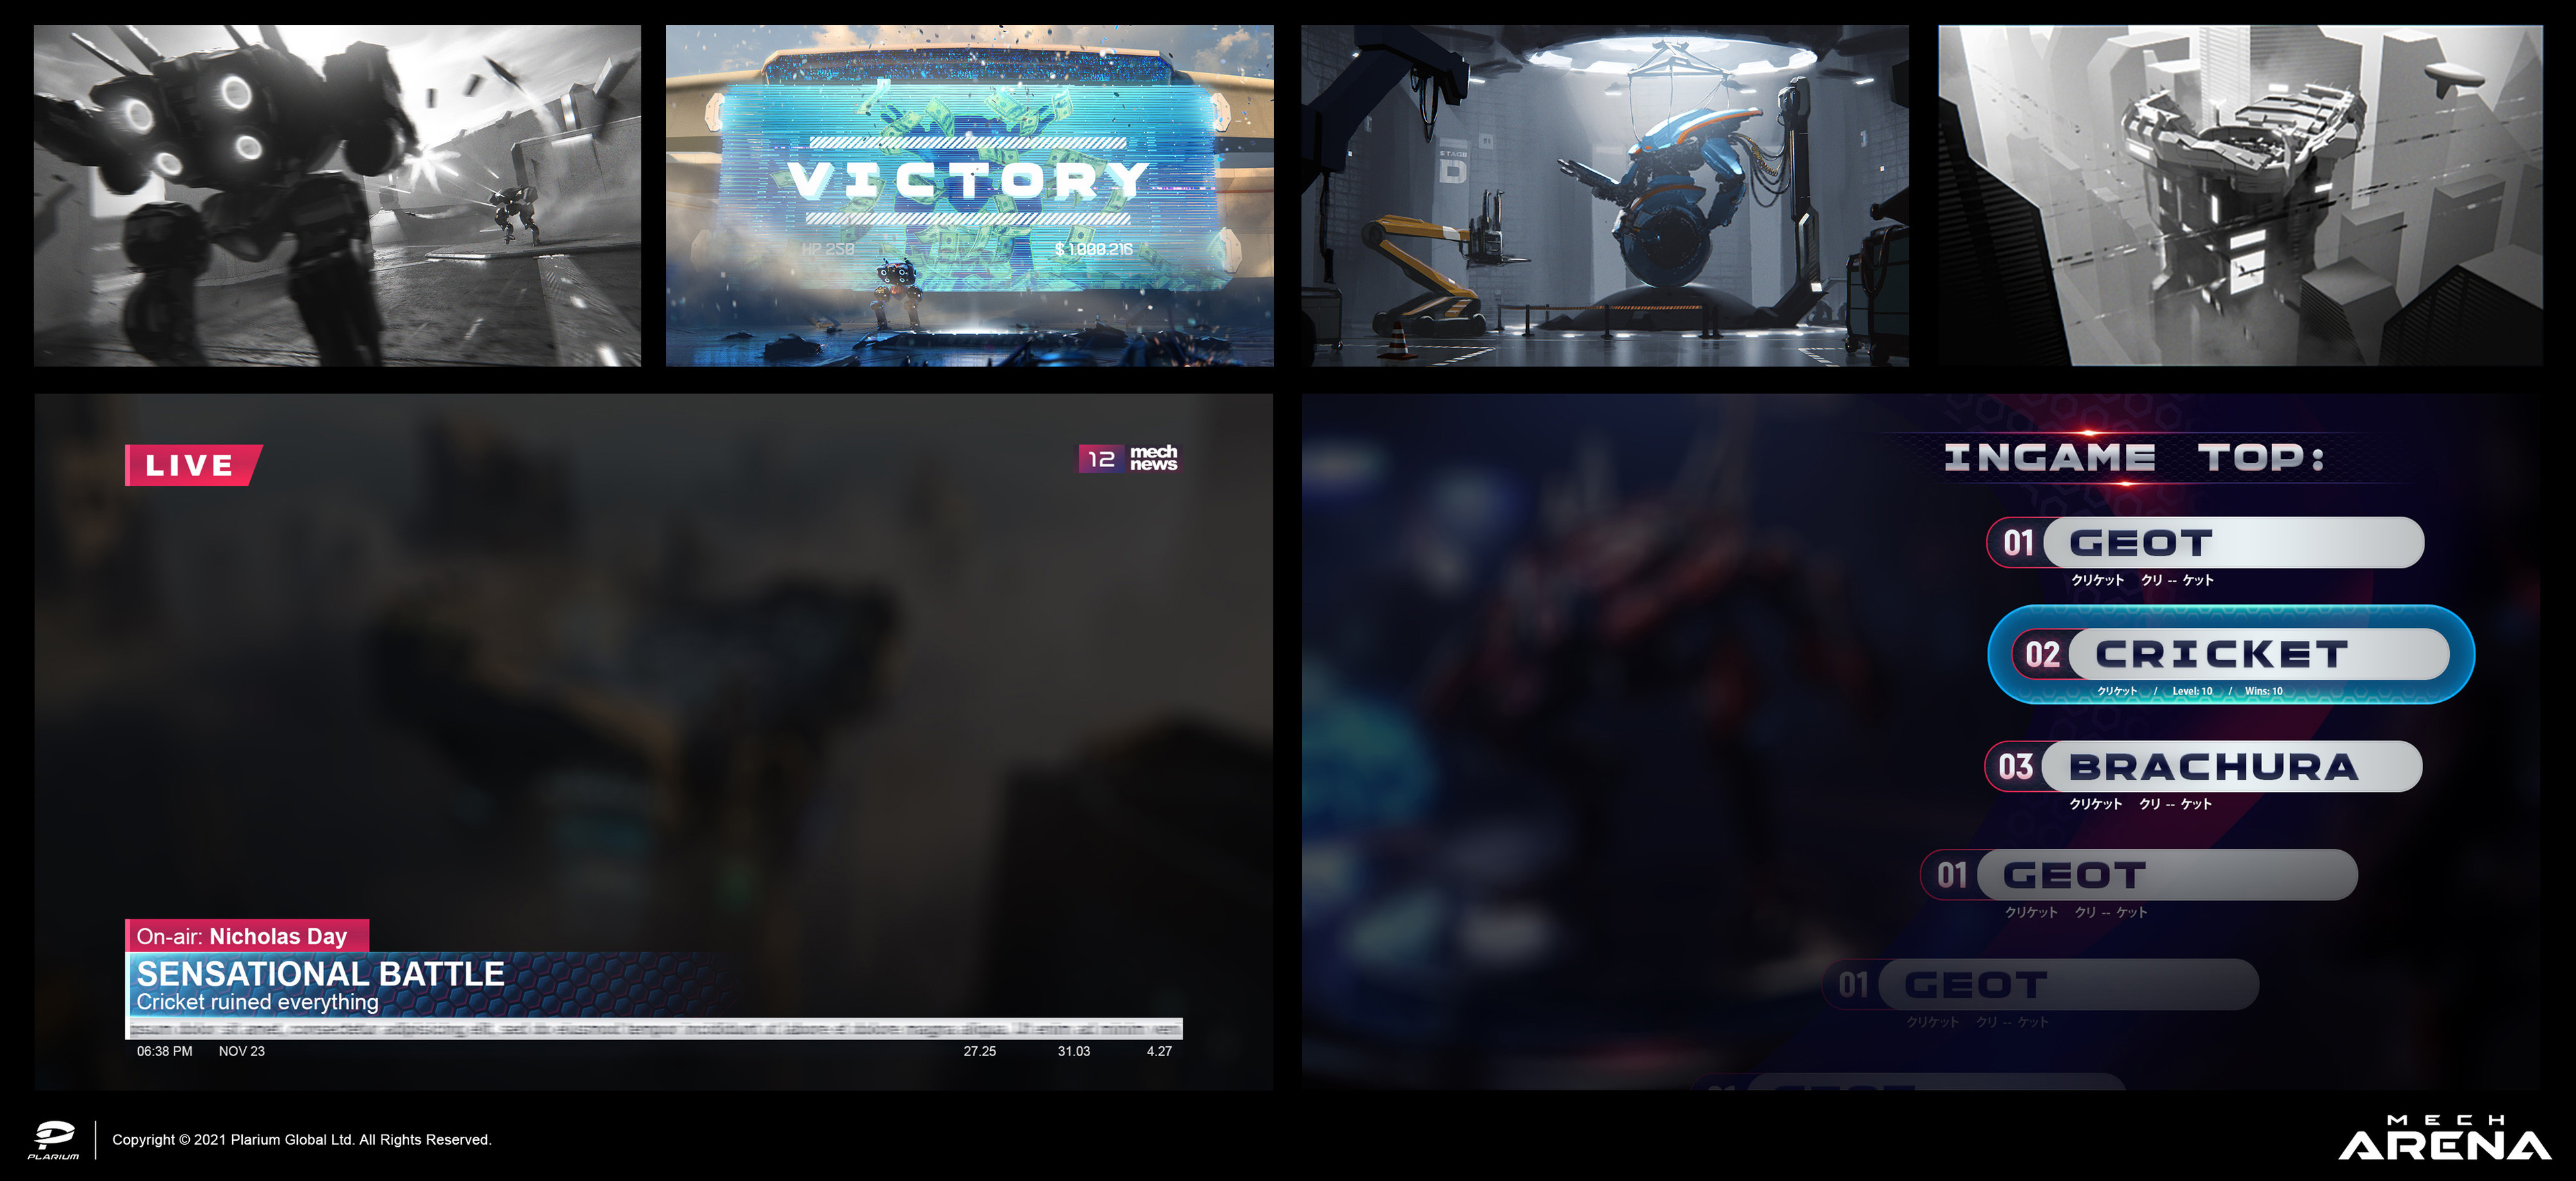 Few more images I did for the project: keyframes ideation and TV id concepts